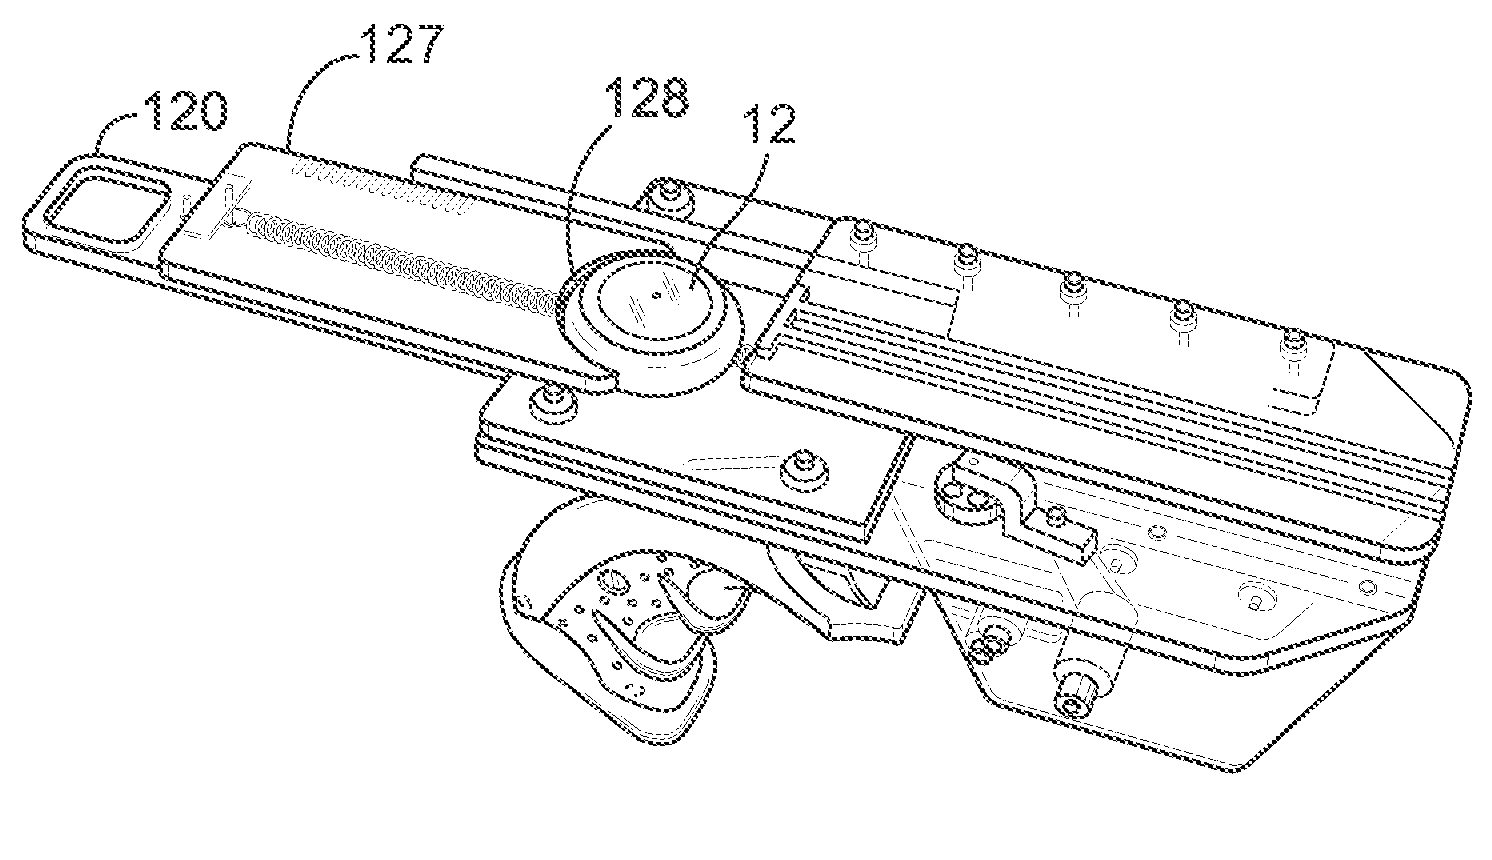 Toy projectile launcher apparatus